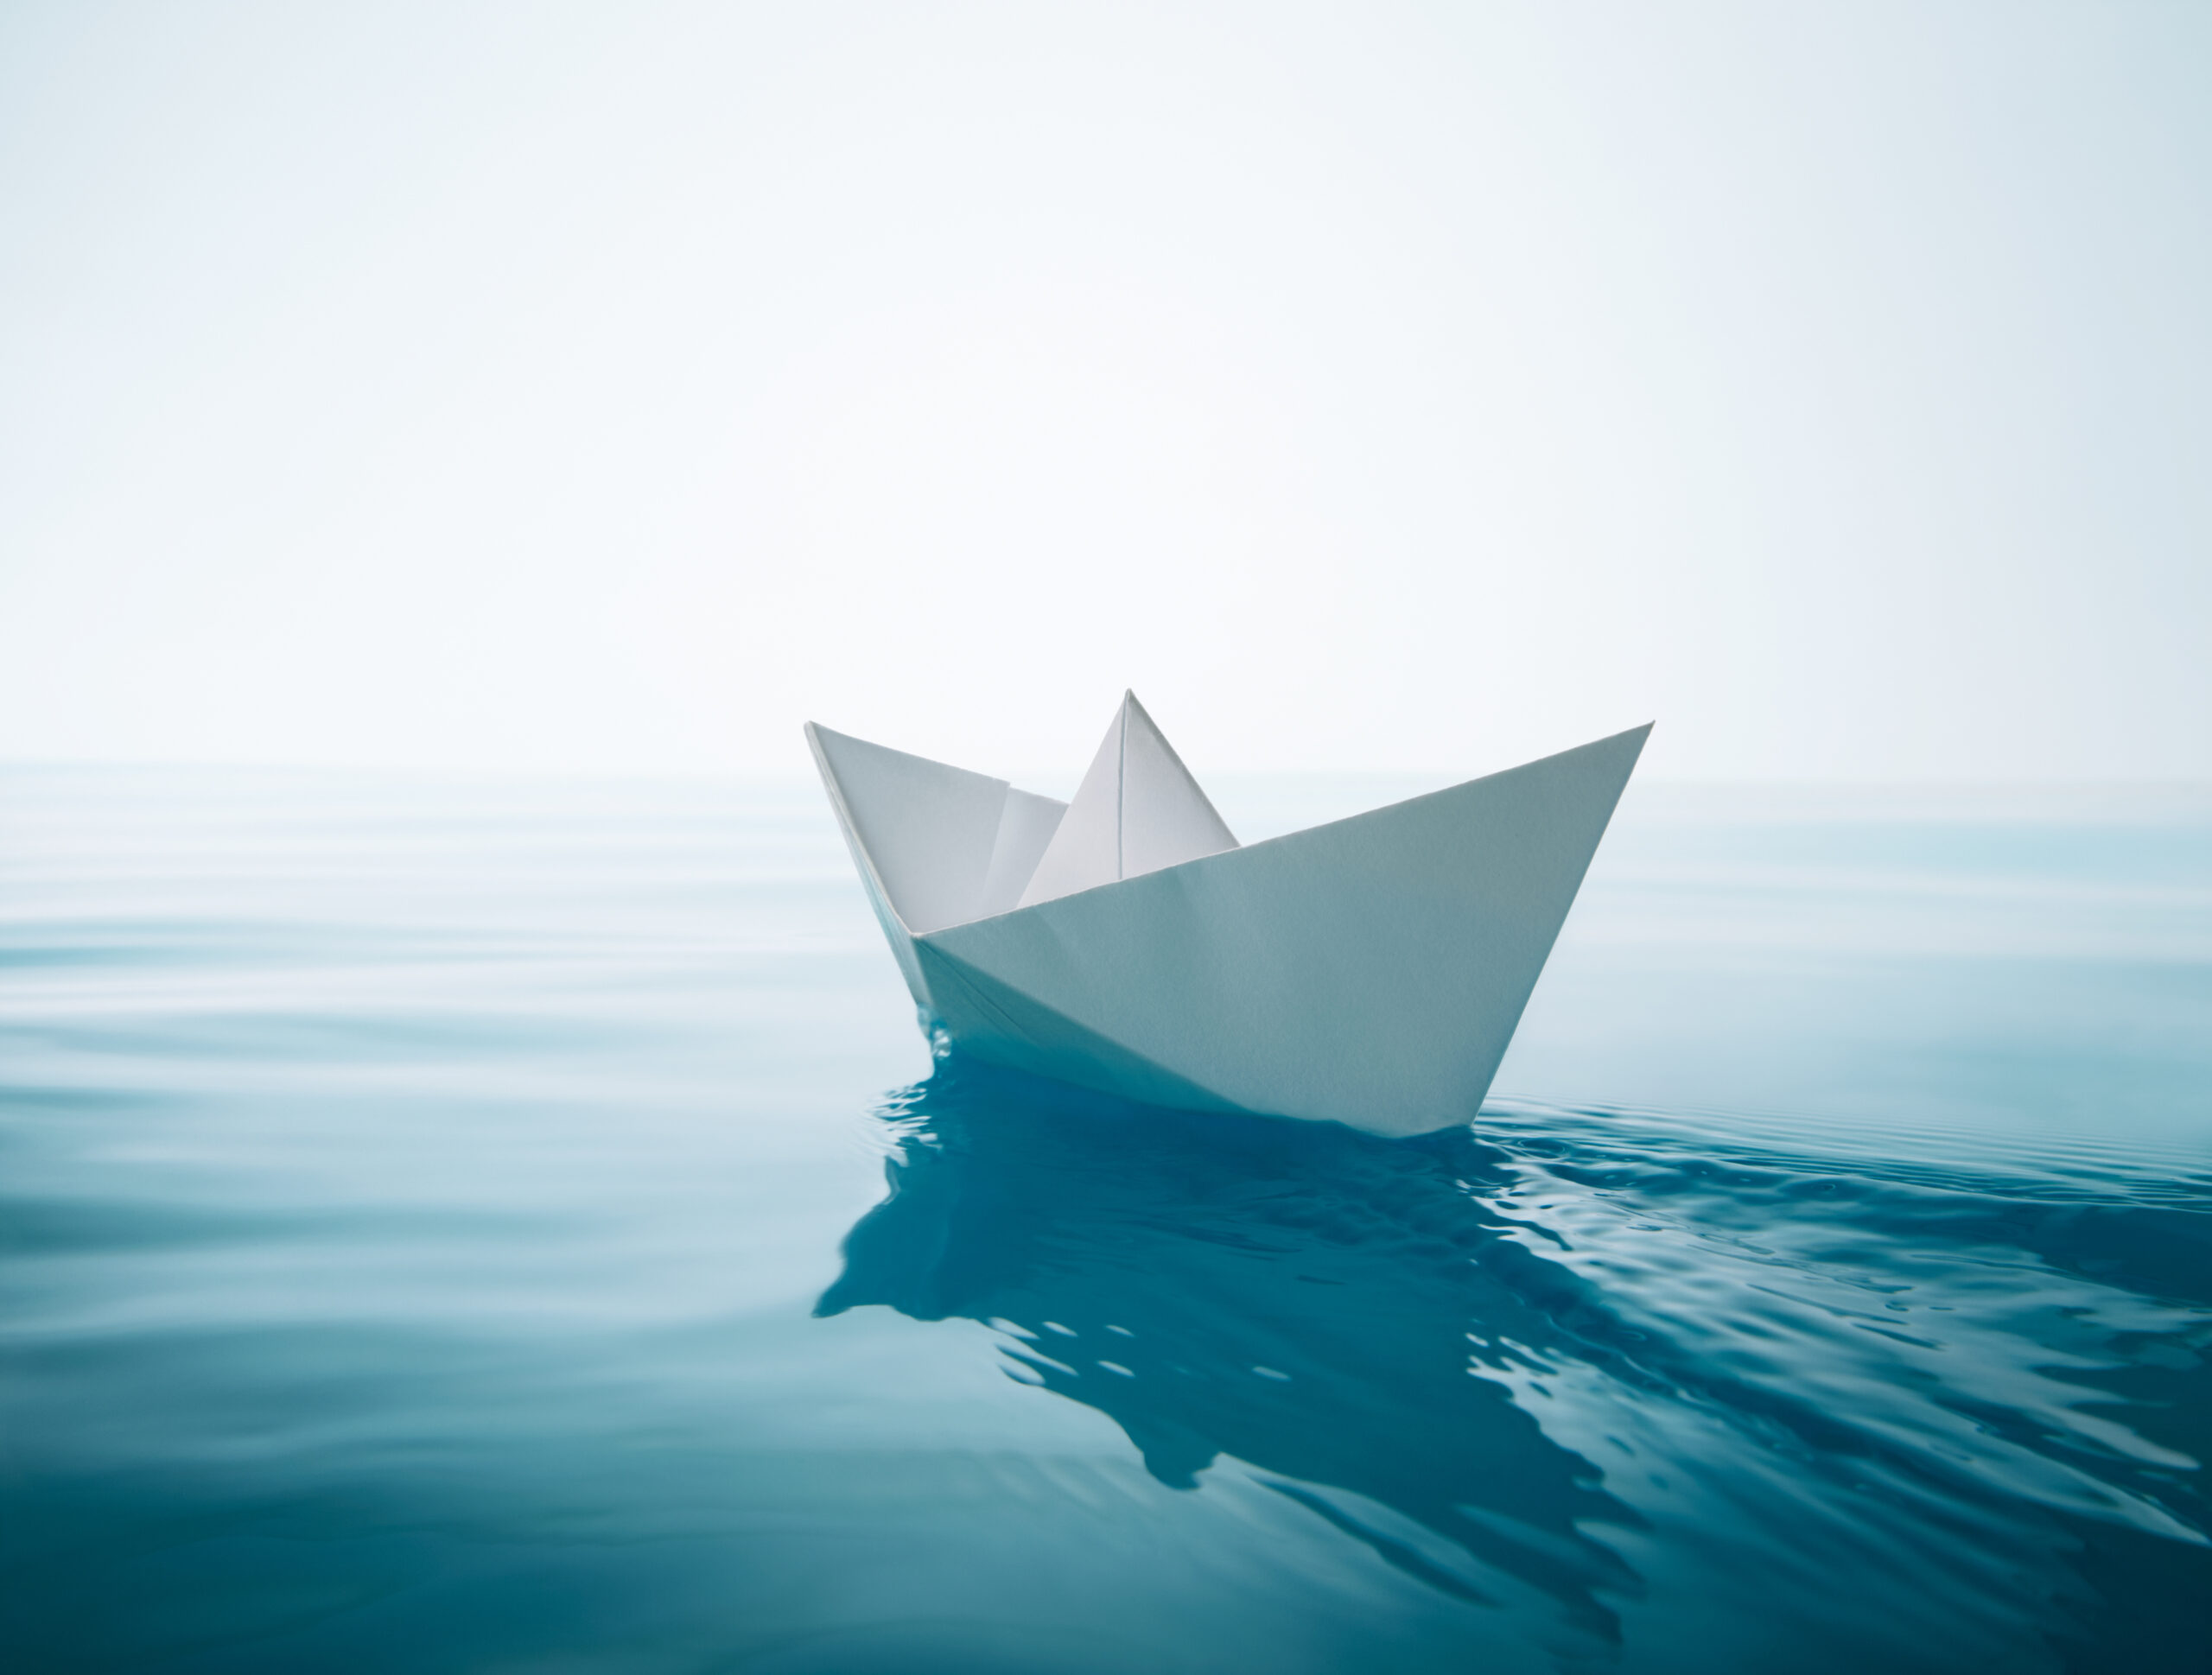 A paper boat sailing [The Wind is at Your Back. What are YOU Going to do?]